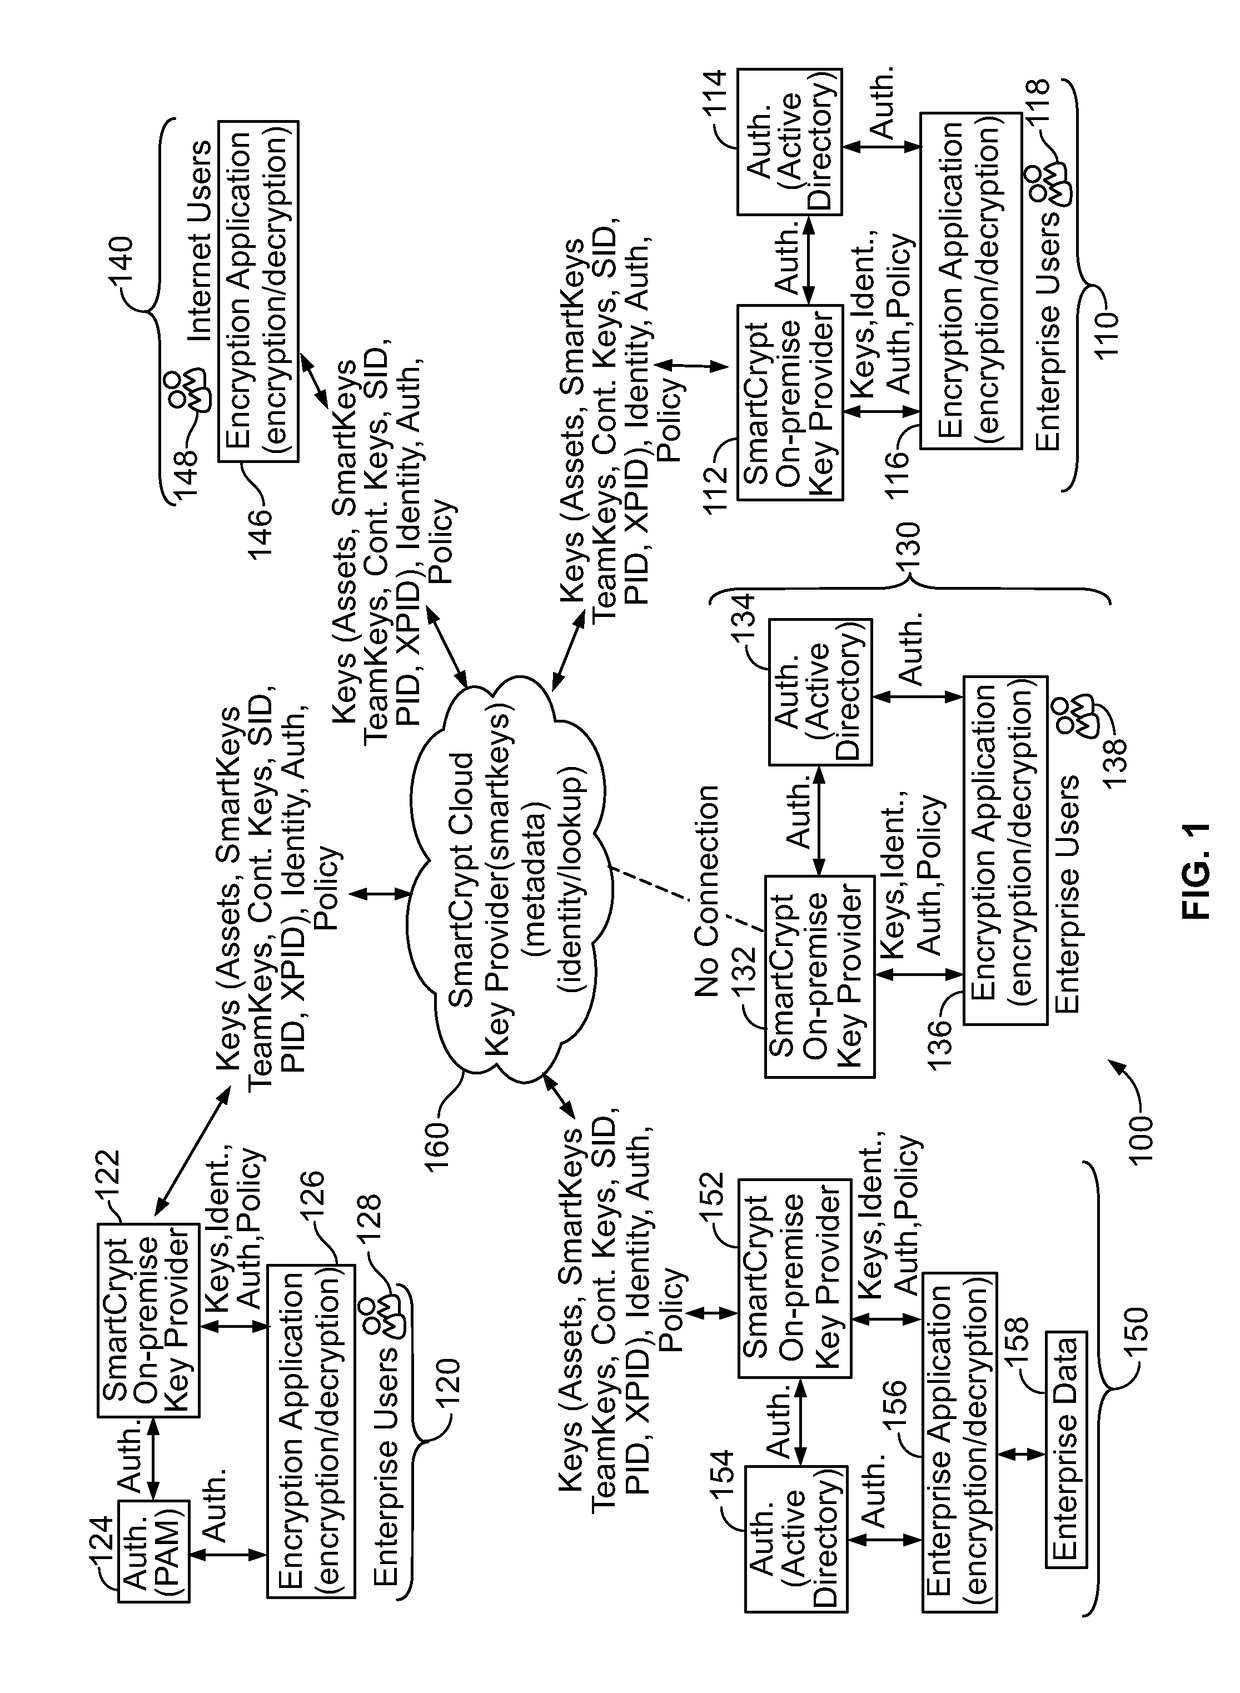 Systems and Methods for Smartkey Information Management